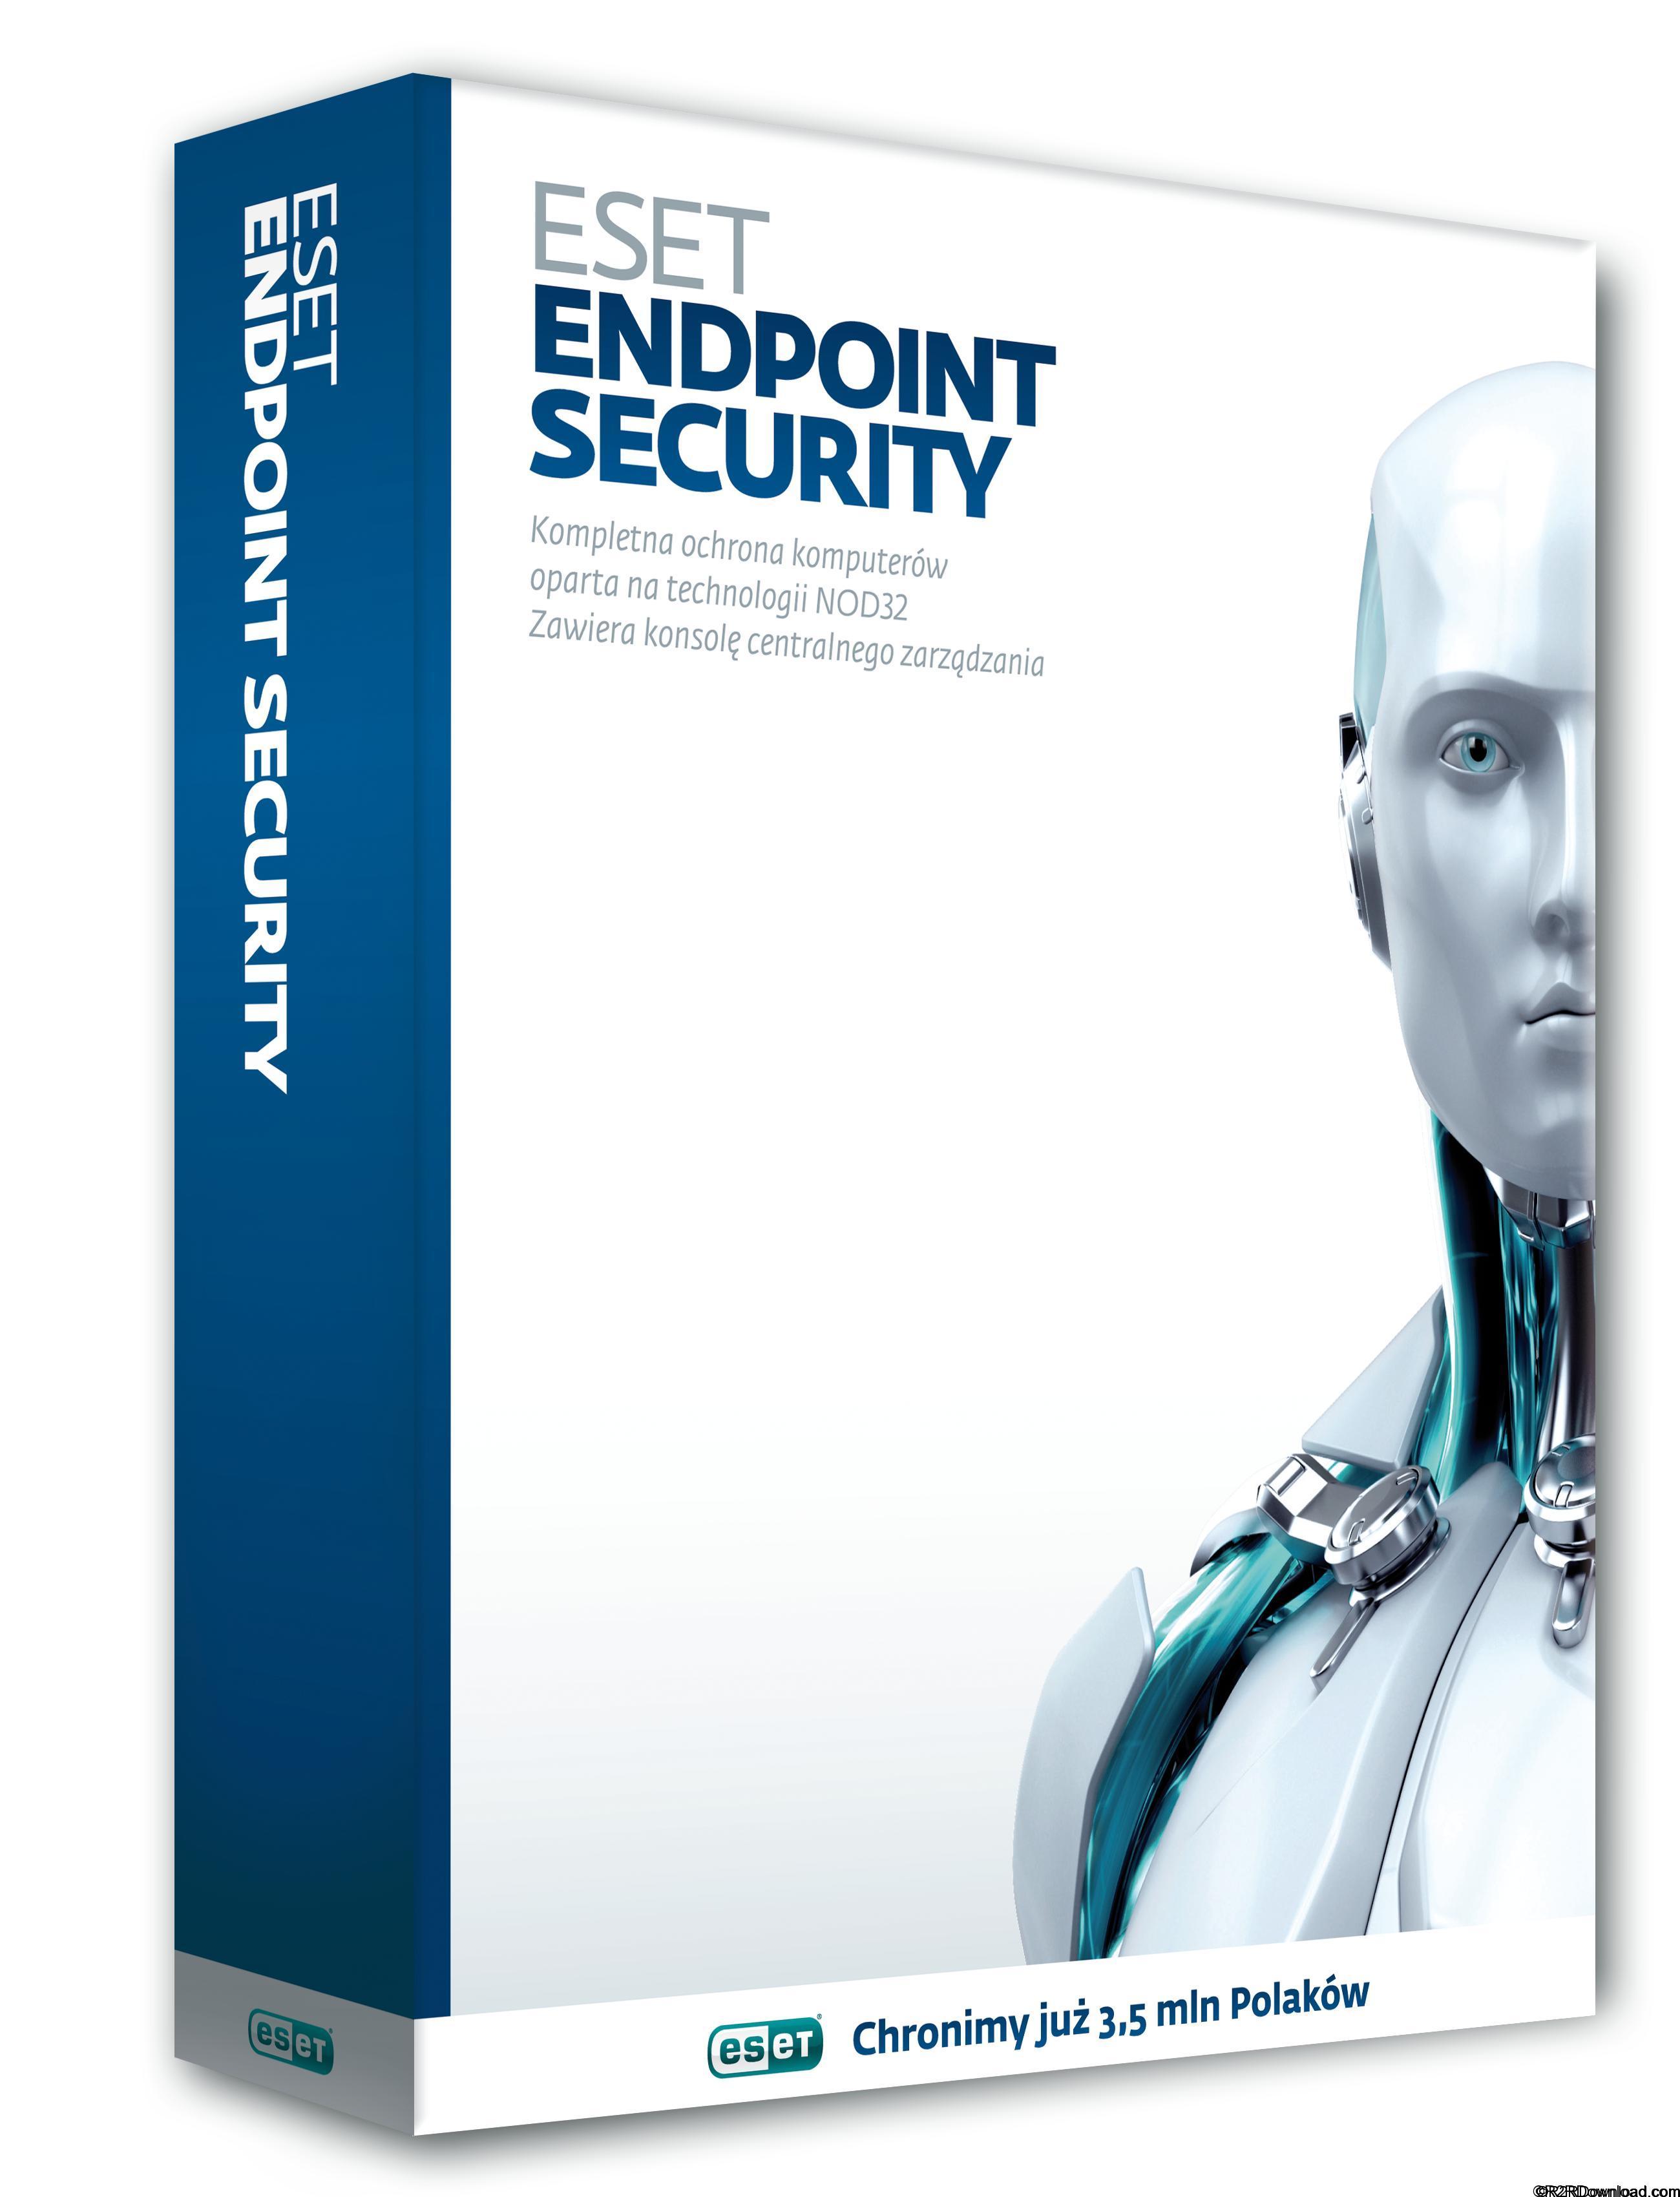 ESET Endpoint Security 6.5 Free Download